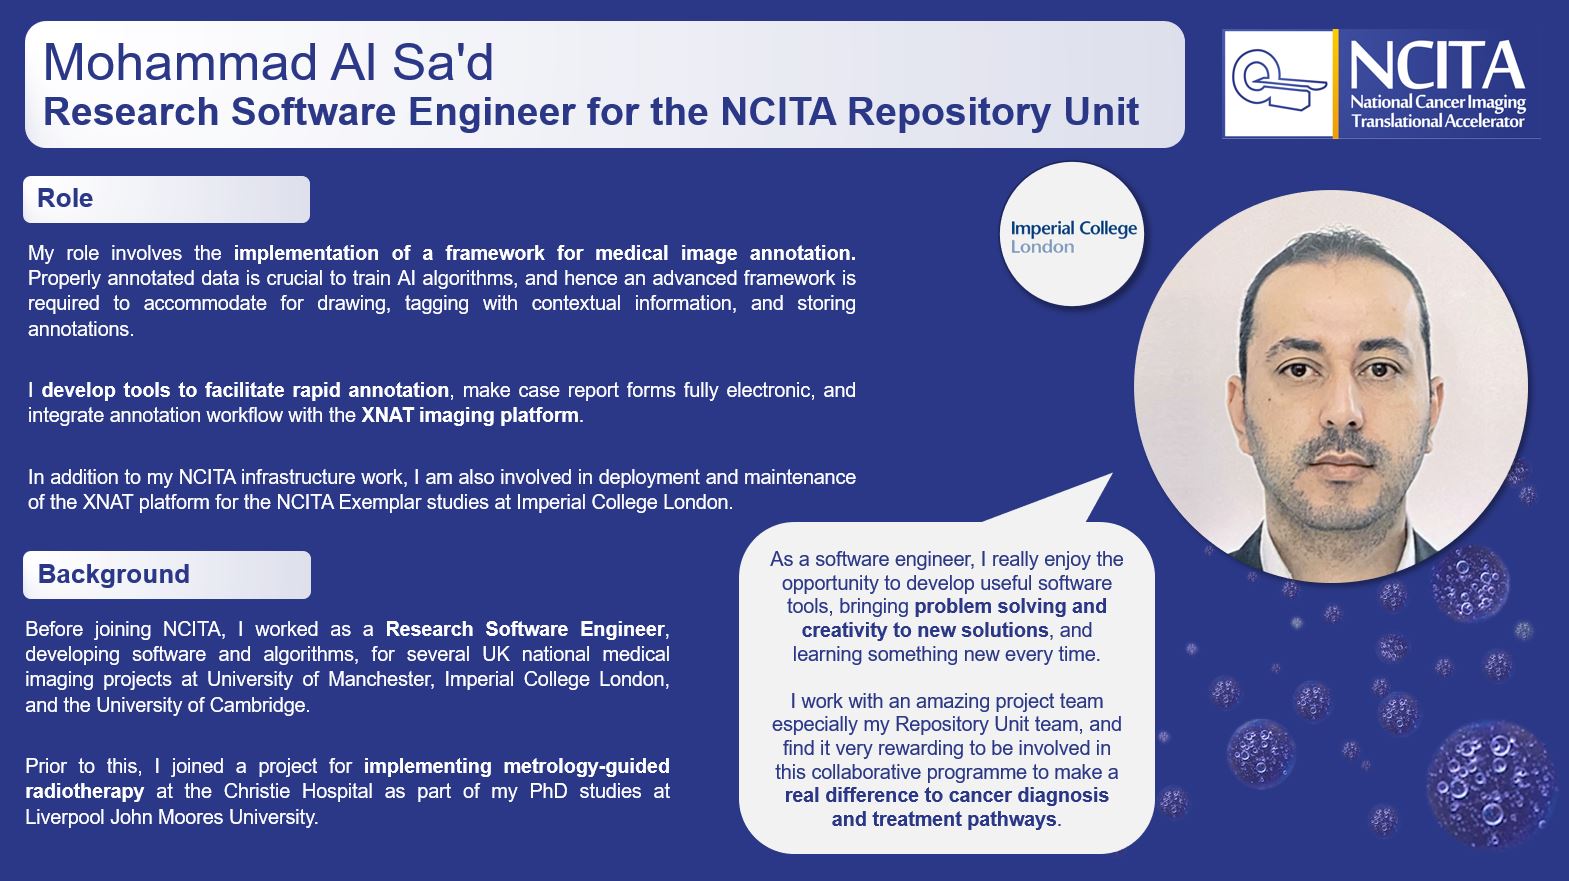 Mohammad Al Sa'd provides an overview of his role as a Research Software Engineer for the NCITA Repository Unit